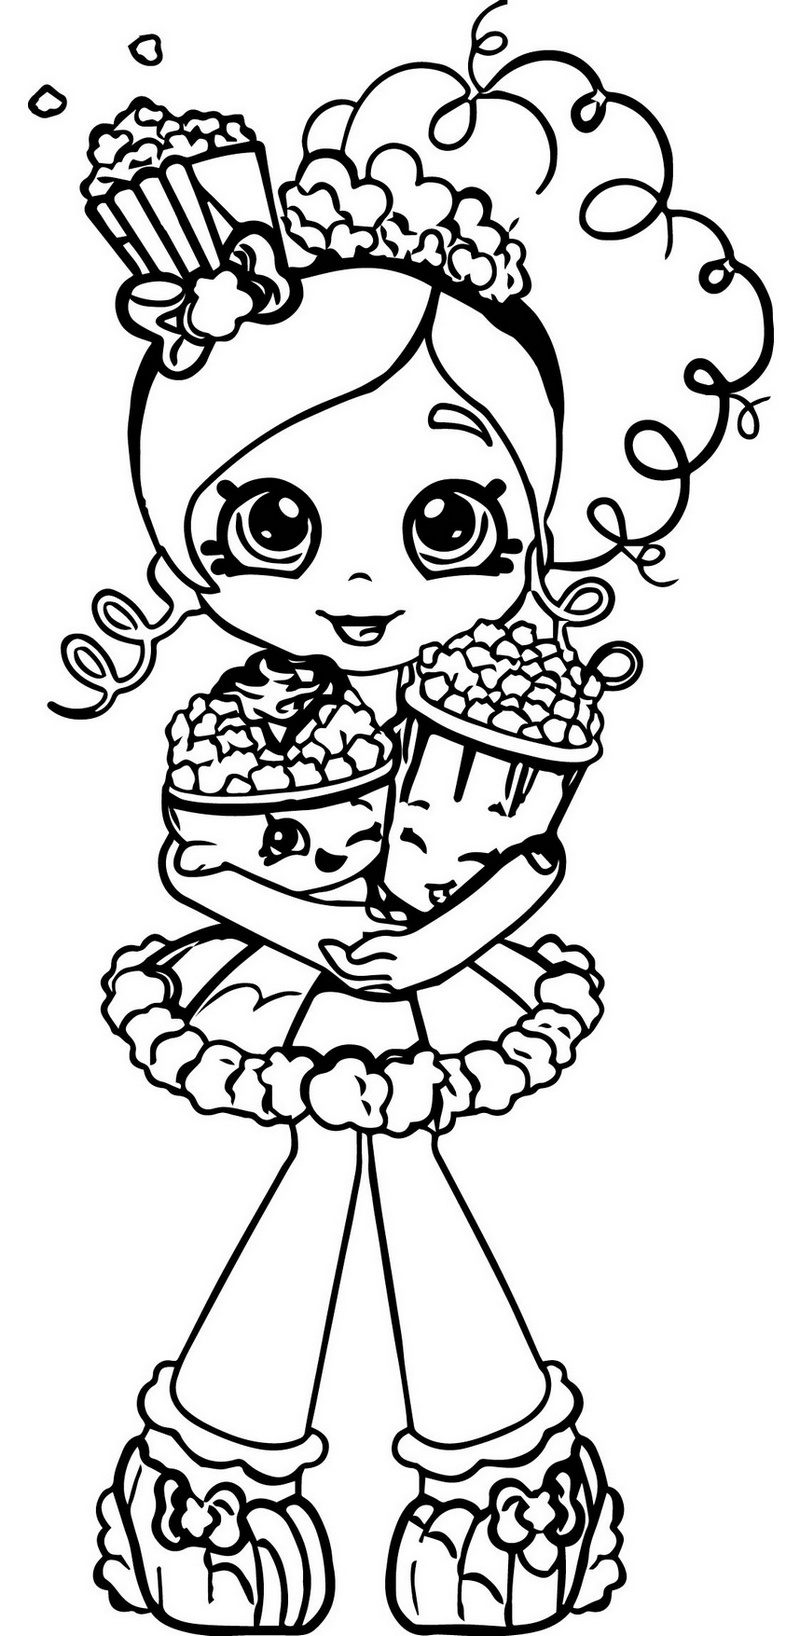 shopkins popcorn coloring and activity page